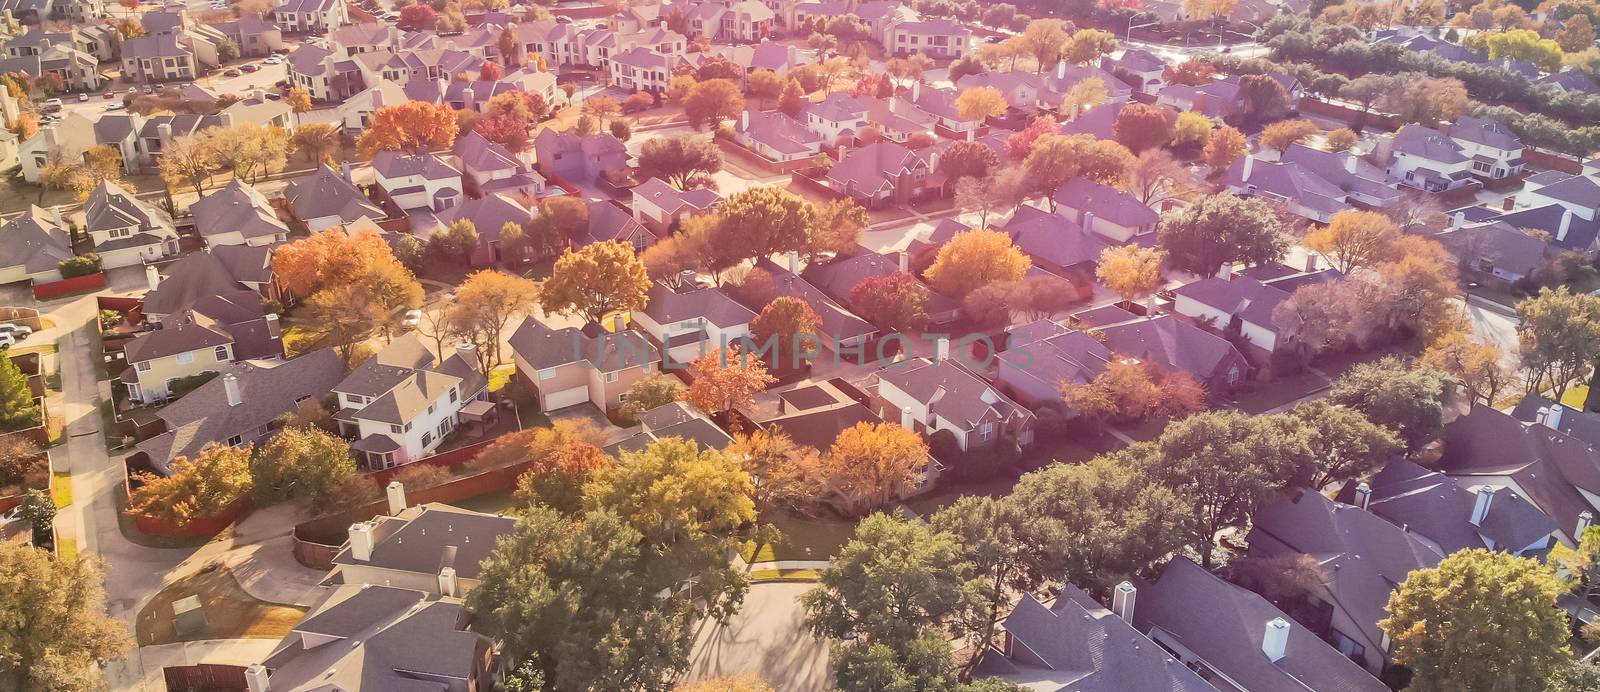 Panorama aerial drone view urban sprawl in suburban Dallas, Texas during fall season with colorful leaves. Flyover subdivision with row of single-family detached houses and apartment complex